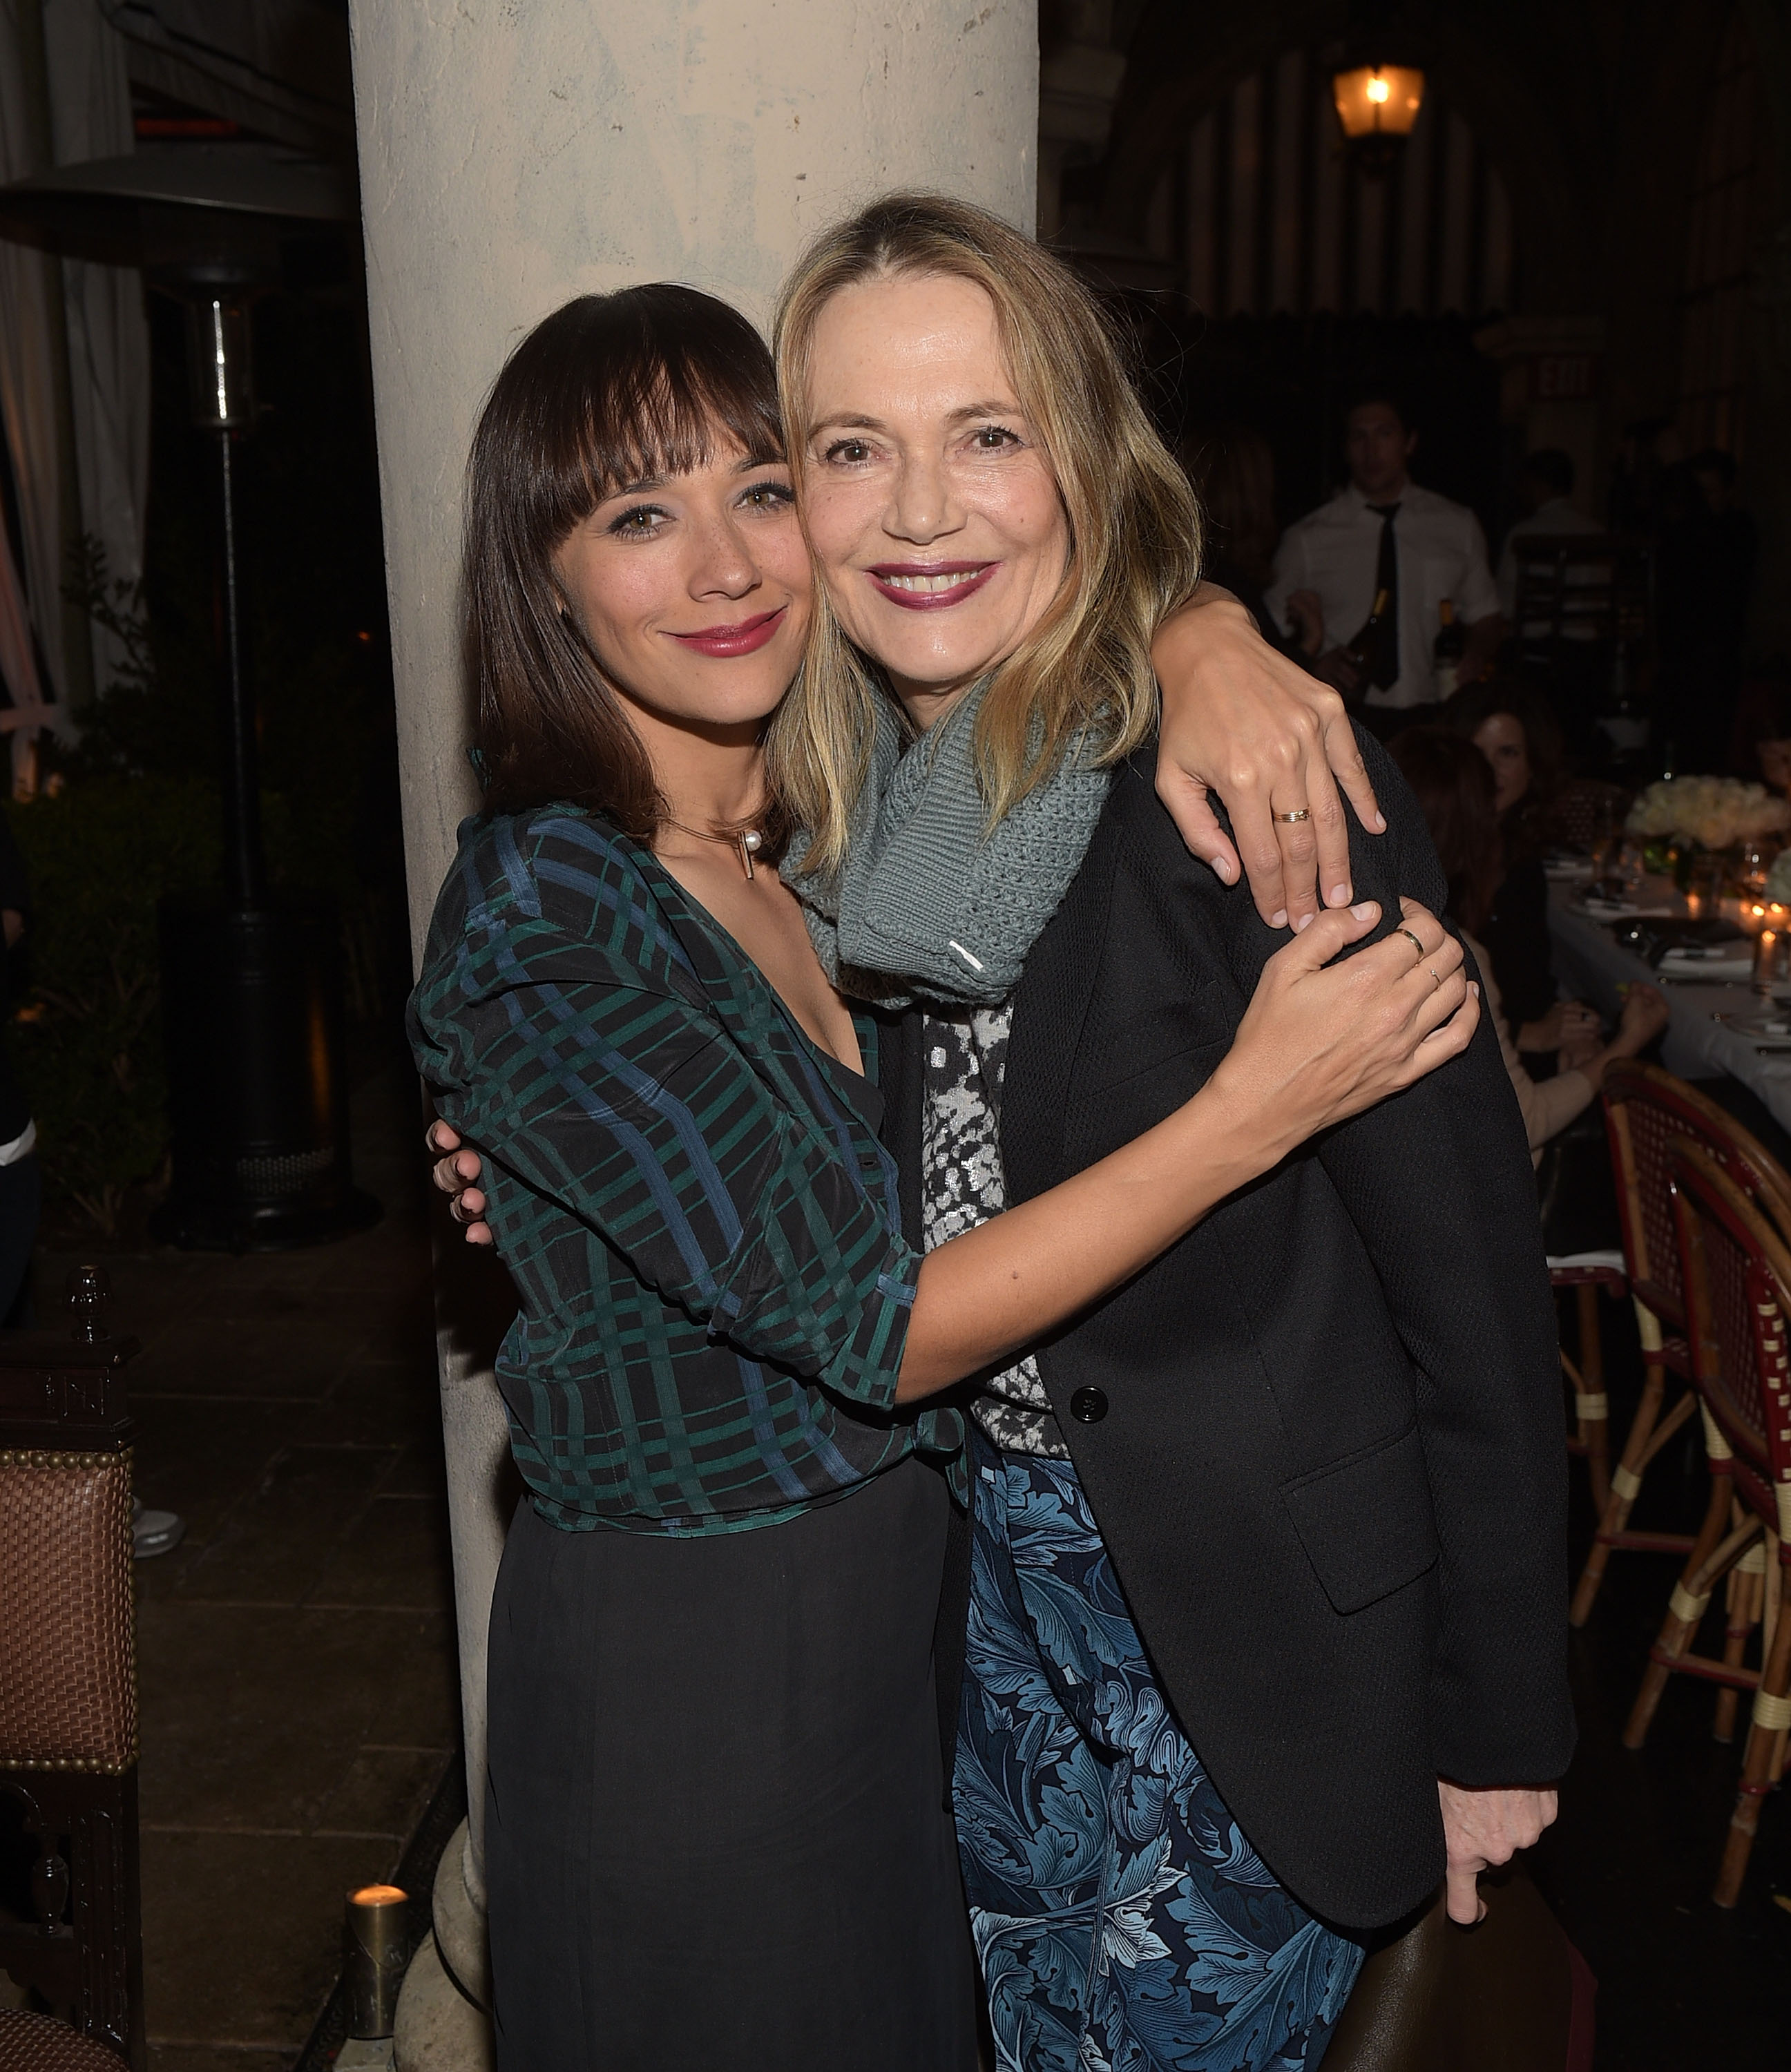 Rashida Jones and Peggy Lipton pose at the Equipment and Vanity Fair Dinner hosted by Rashida Jones and Krista Smith at Chateau Marmont on December 8, 2015, in Los Angeles, California | Source: Getty Images